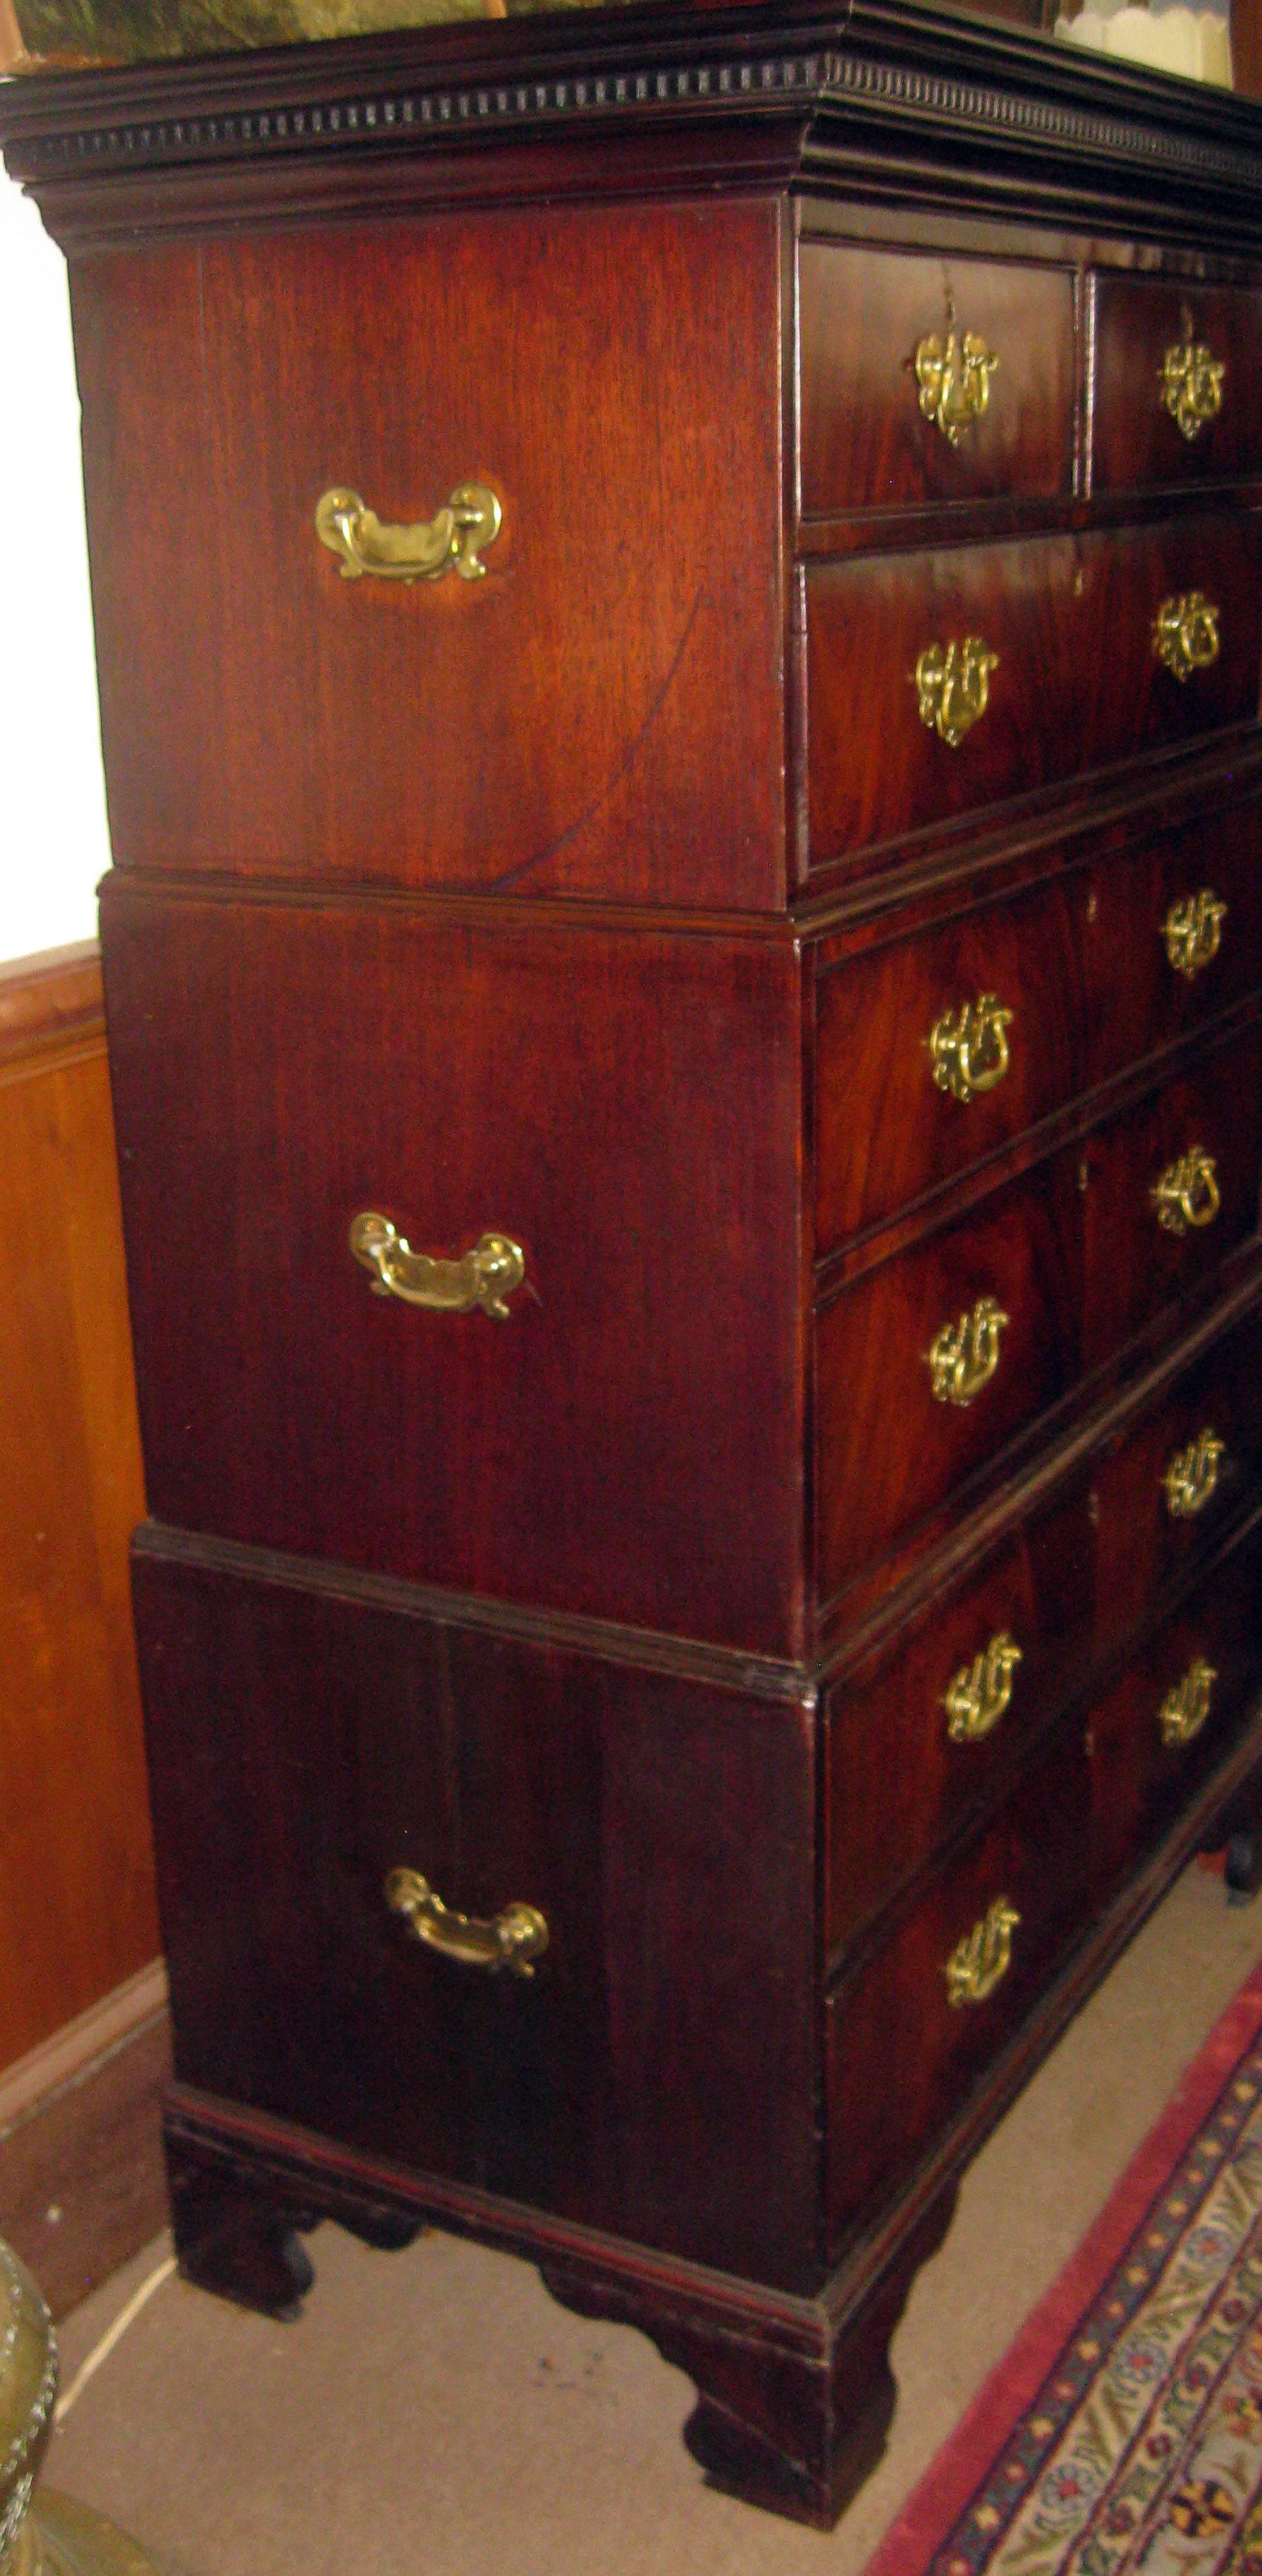 Rare tree part chest on chest with brass carrying handles on sides used for easy transport when travelling. Crown features dental detail. Bracket feet. Original brasses. Seven drawers. Mahogany principle wood, oak secondary. Original finish. There